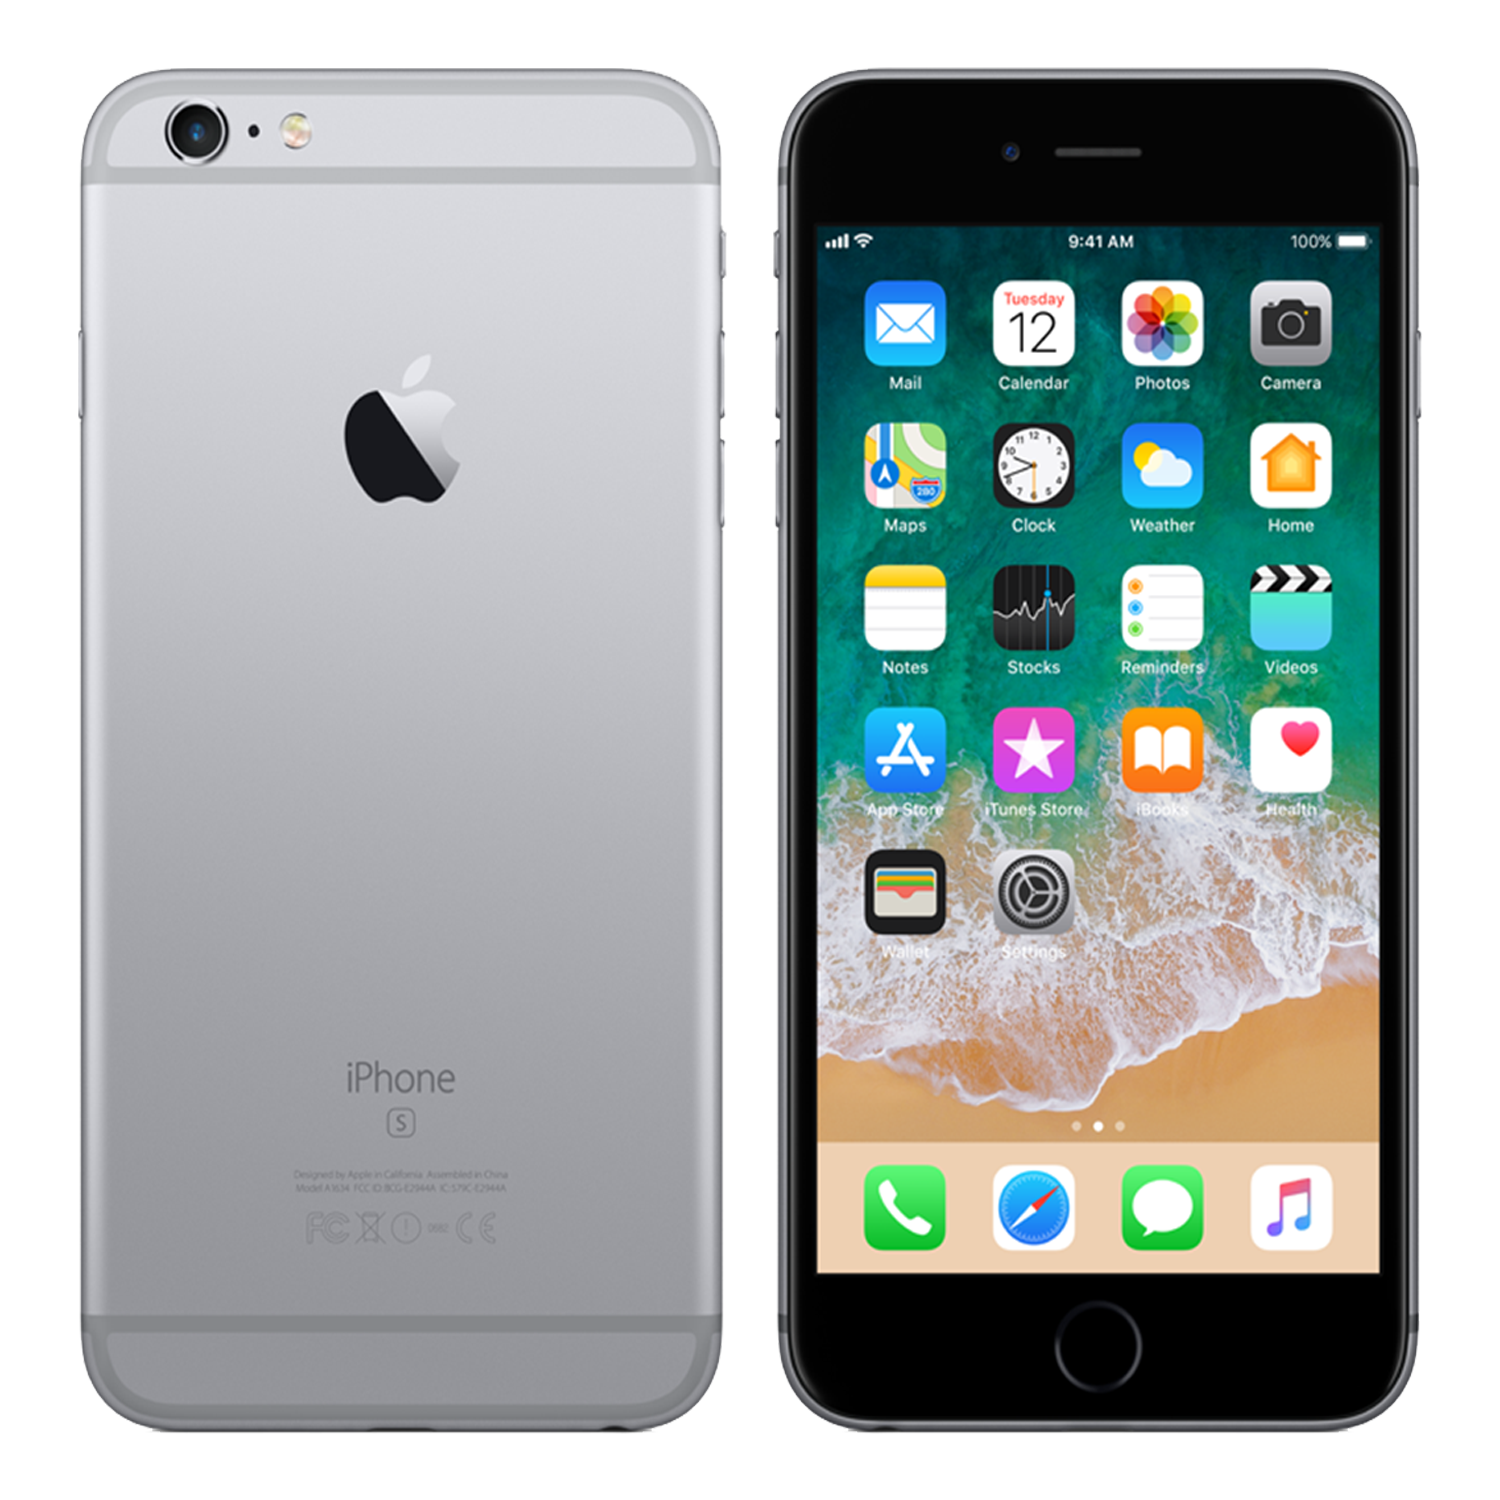 Apple iPhone 6s And iPhone 6s Plus Price, Pre-Order And Release Date